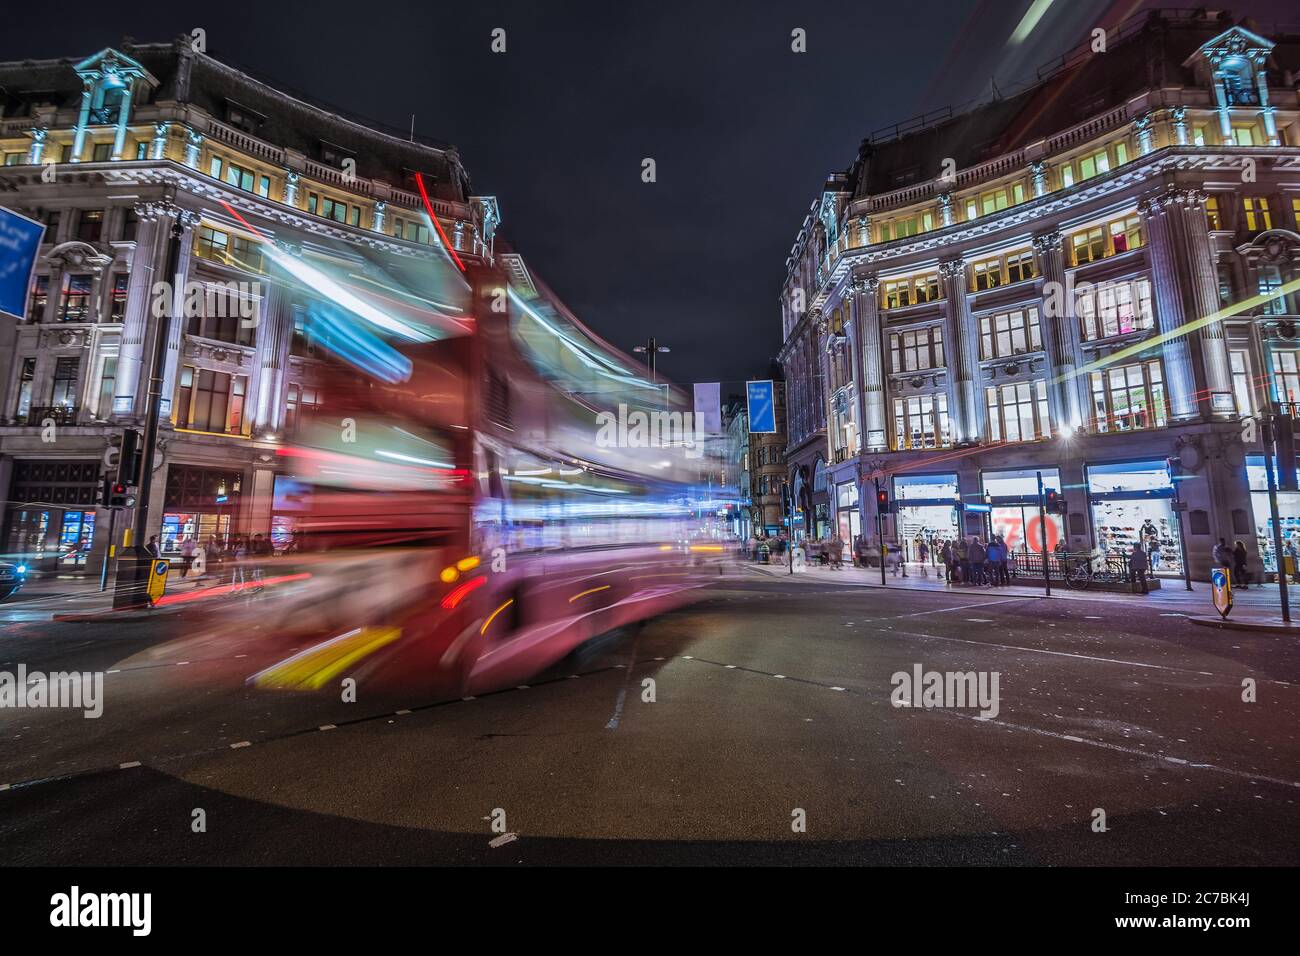 London, United Kingdom. Circa August 2017. Red double-decker bus. Pedestrian and traffic in Oxford Circus at night Stock Photo